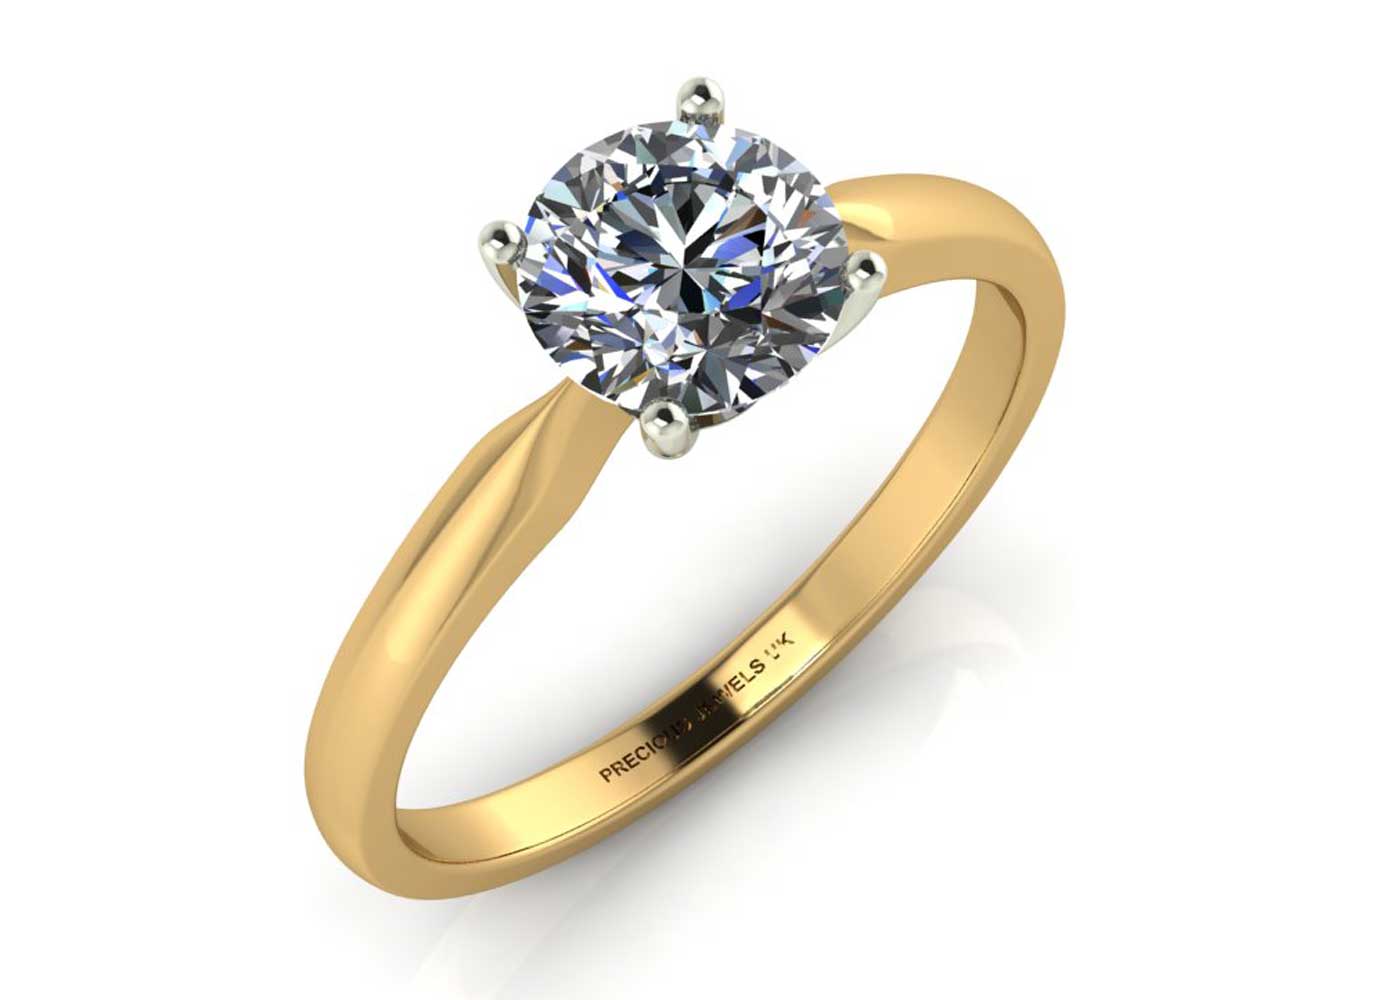 18ct Yellow Gold Claw Set Diamond Ring 0.25 Carats - Image 2 of 4